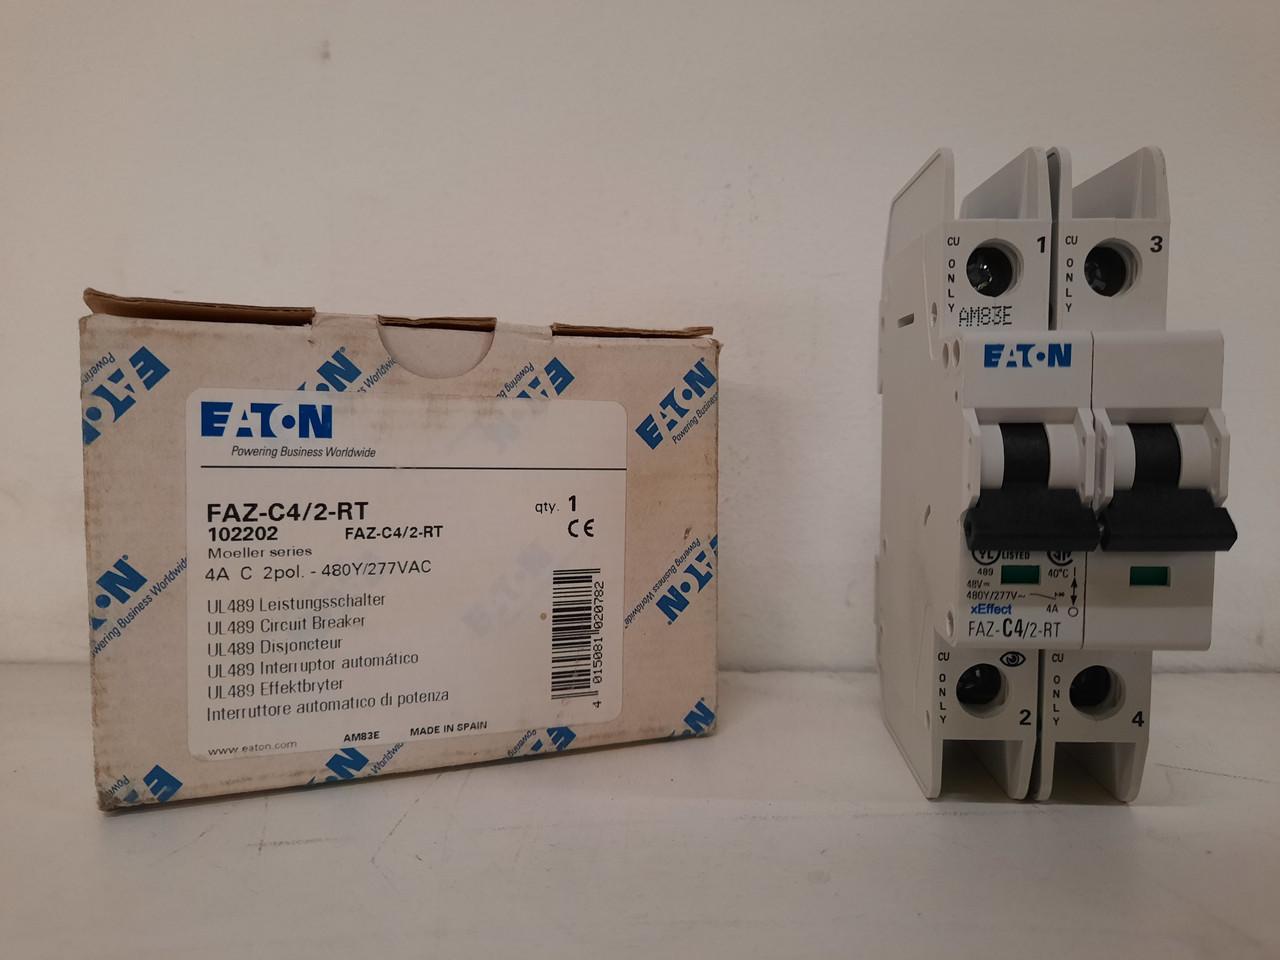 Eaton FAZ-C4/2-RT 277/480 VAC 50/60 Hz, 4 A, 2-Pole, 10/14 kA, 5 to 10 x Rated Current, Ring Tongue Terminal, DIN Rail Mount, Standard Packaging, C-Curve, Current Limiting, Thermal Magnetic